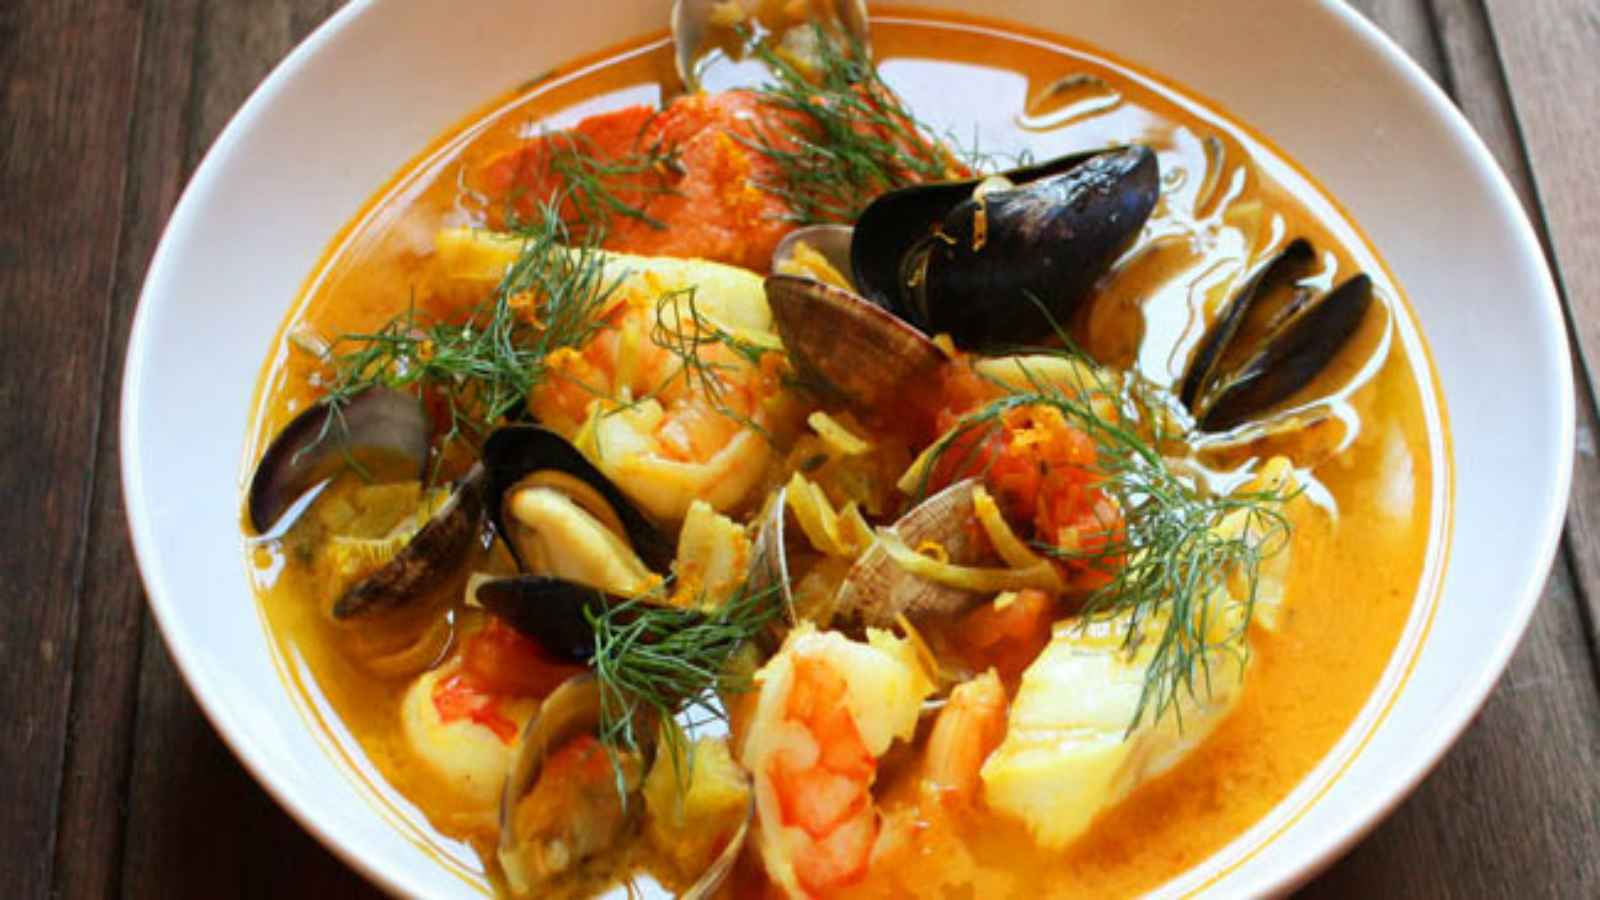 National Bouillabaisse Day 2023: Date, History and Fun recipe for making Bouillabaisse